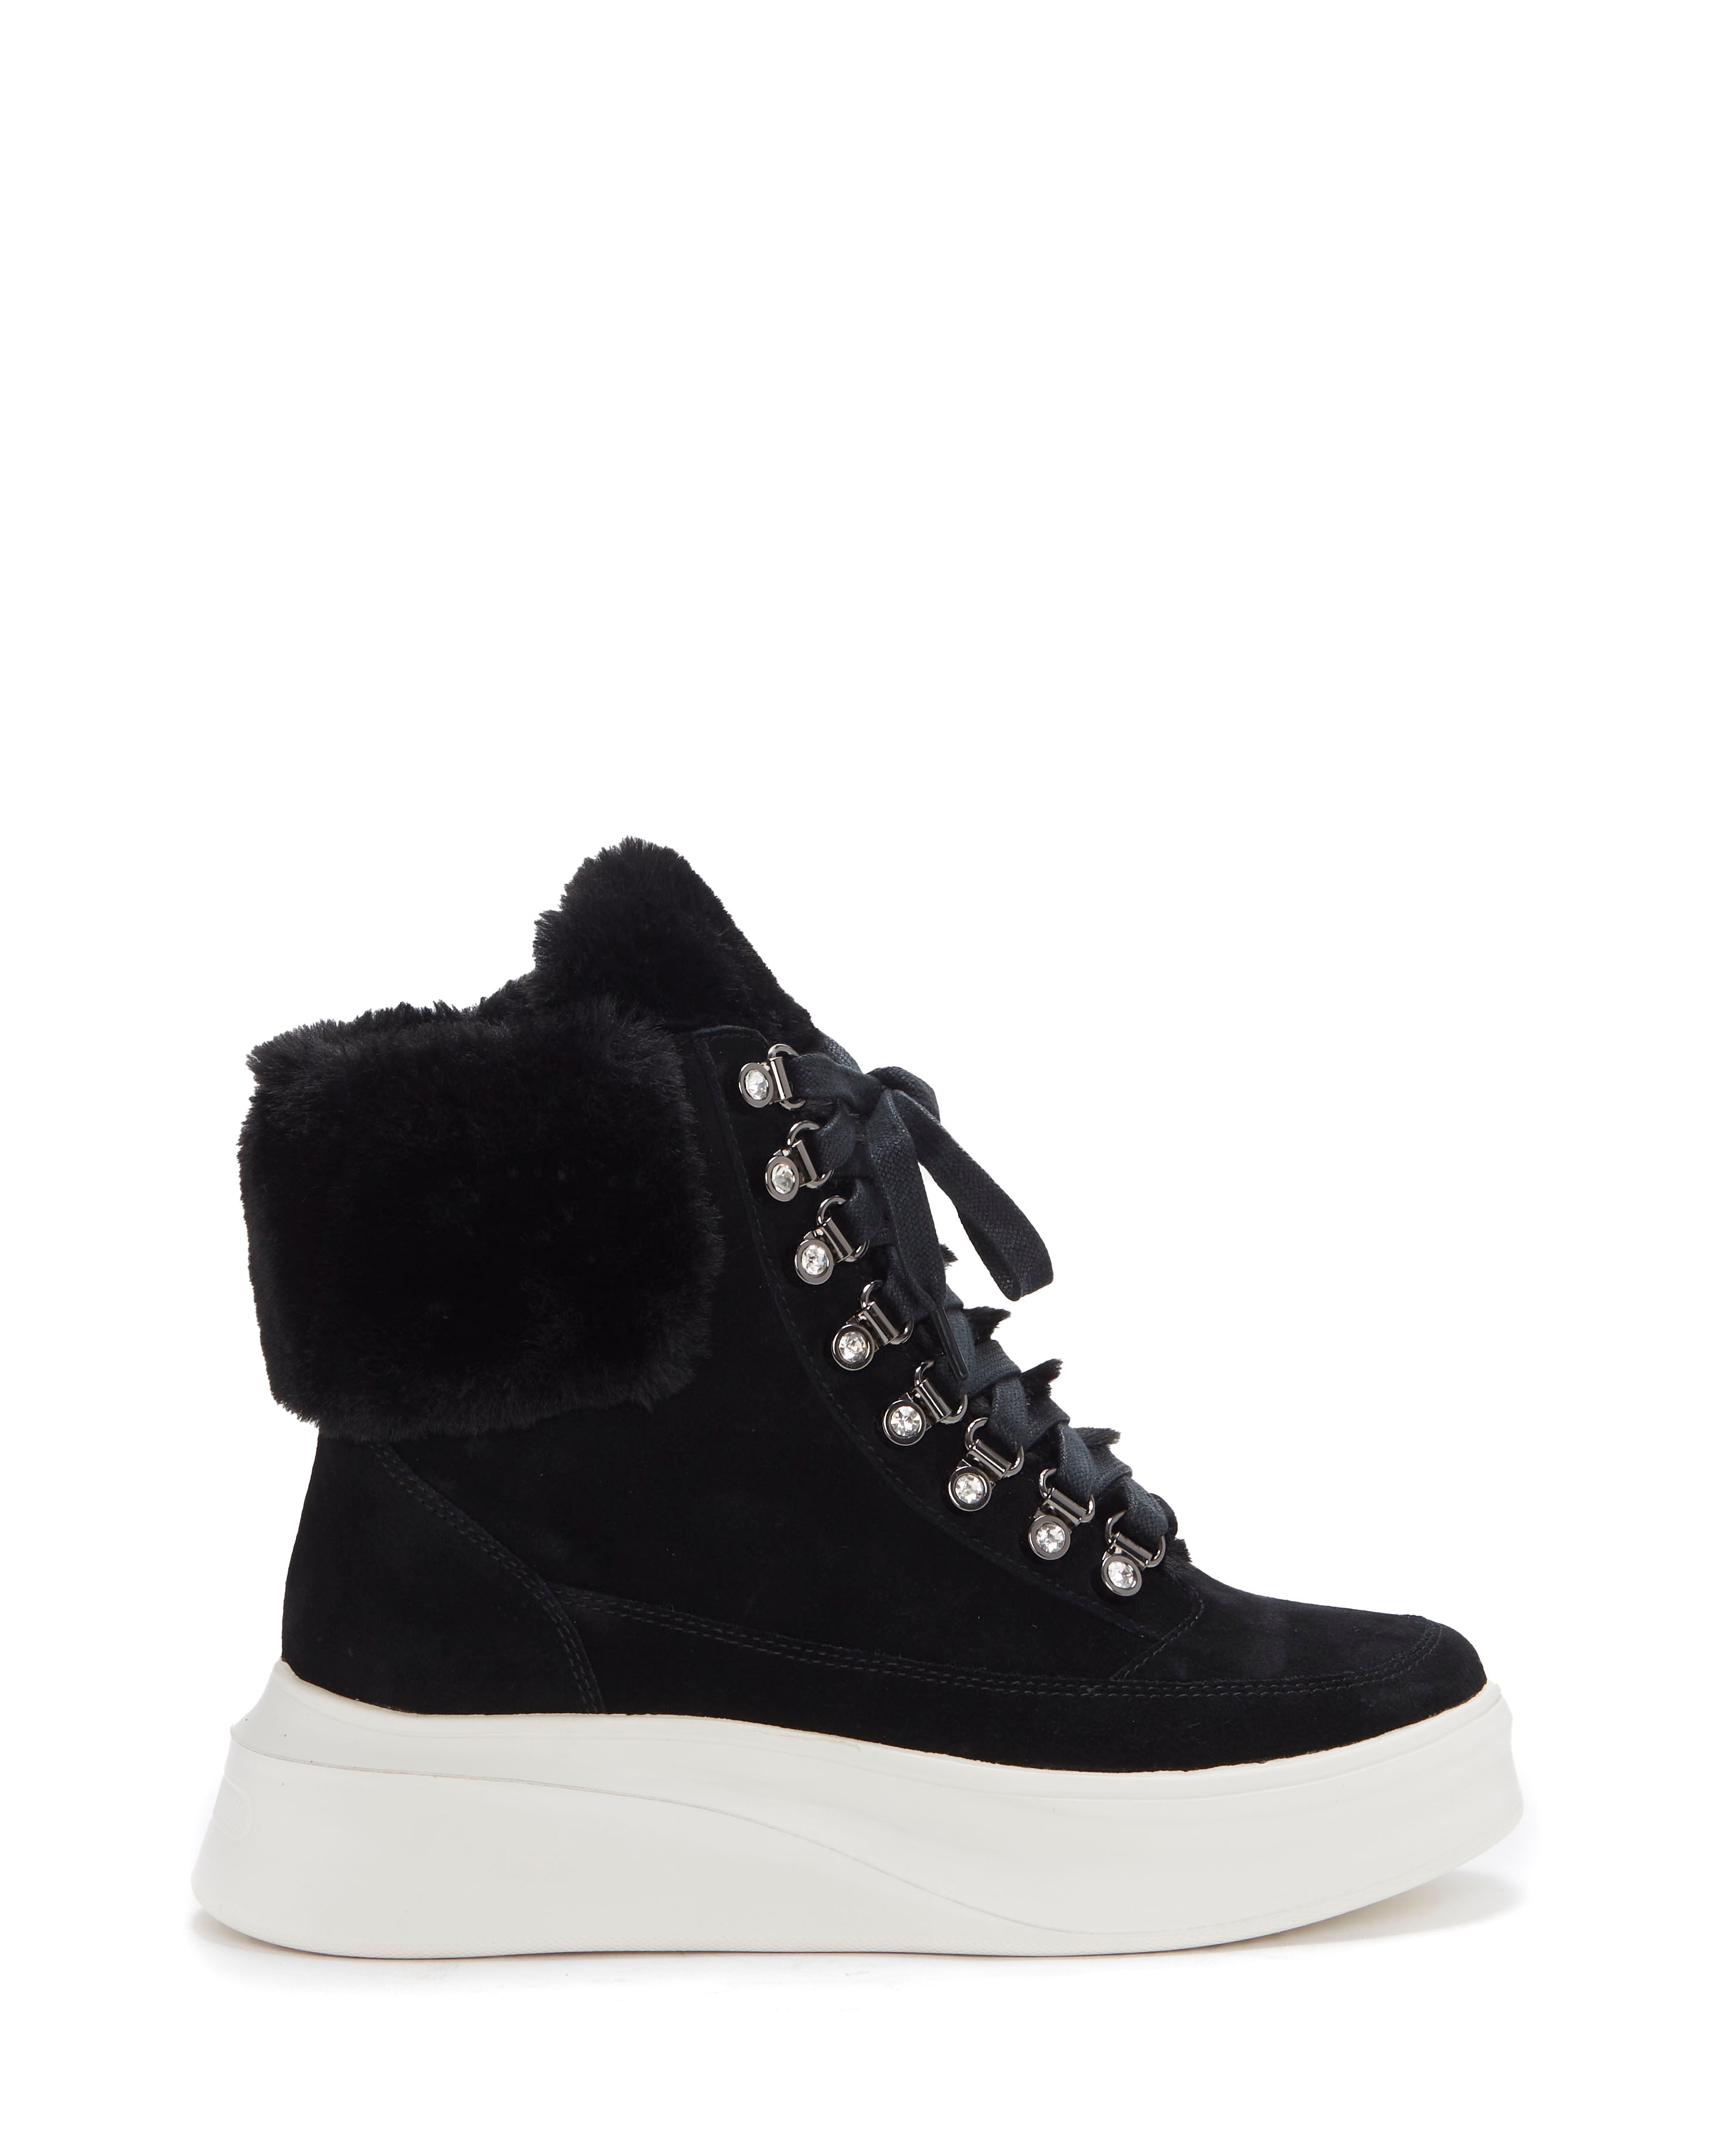 Vince Camuto Taliena Hiker Sneaker | Vince Camuto